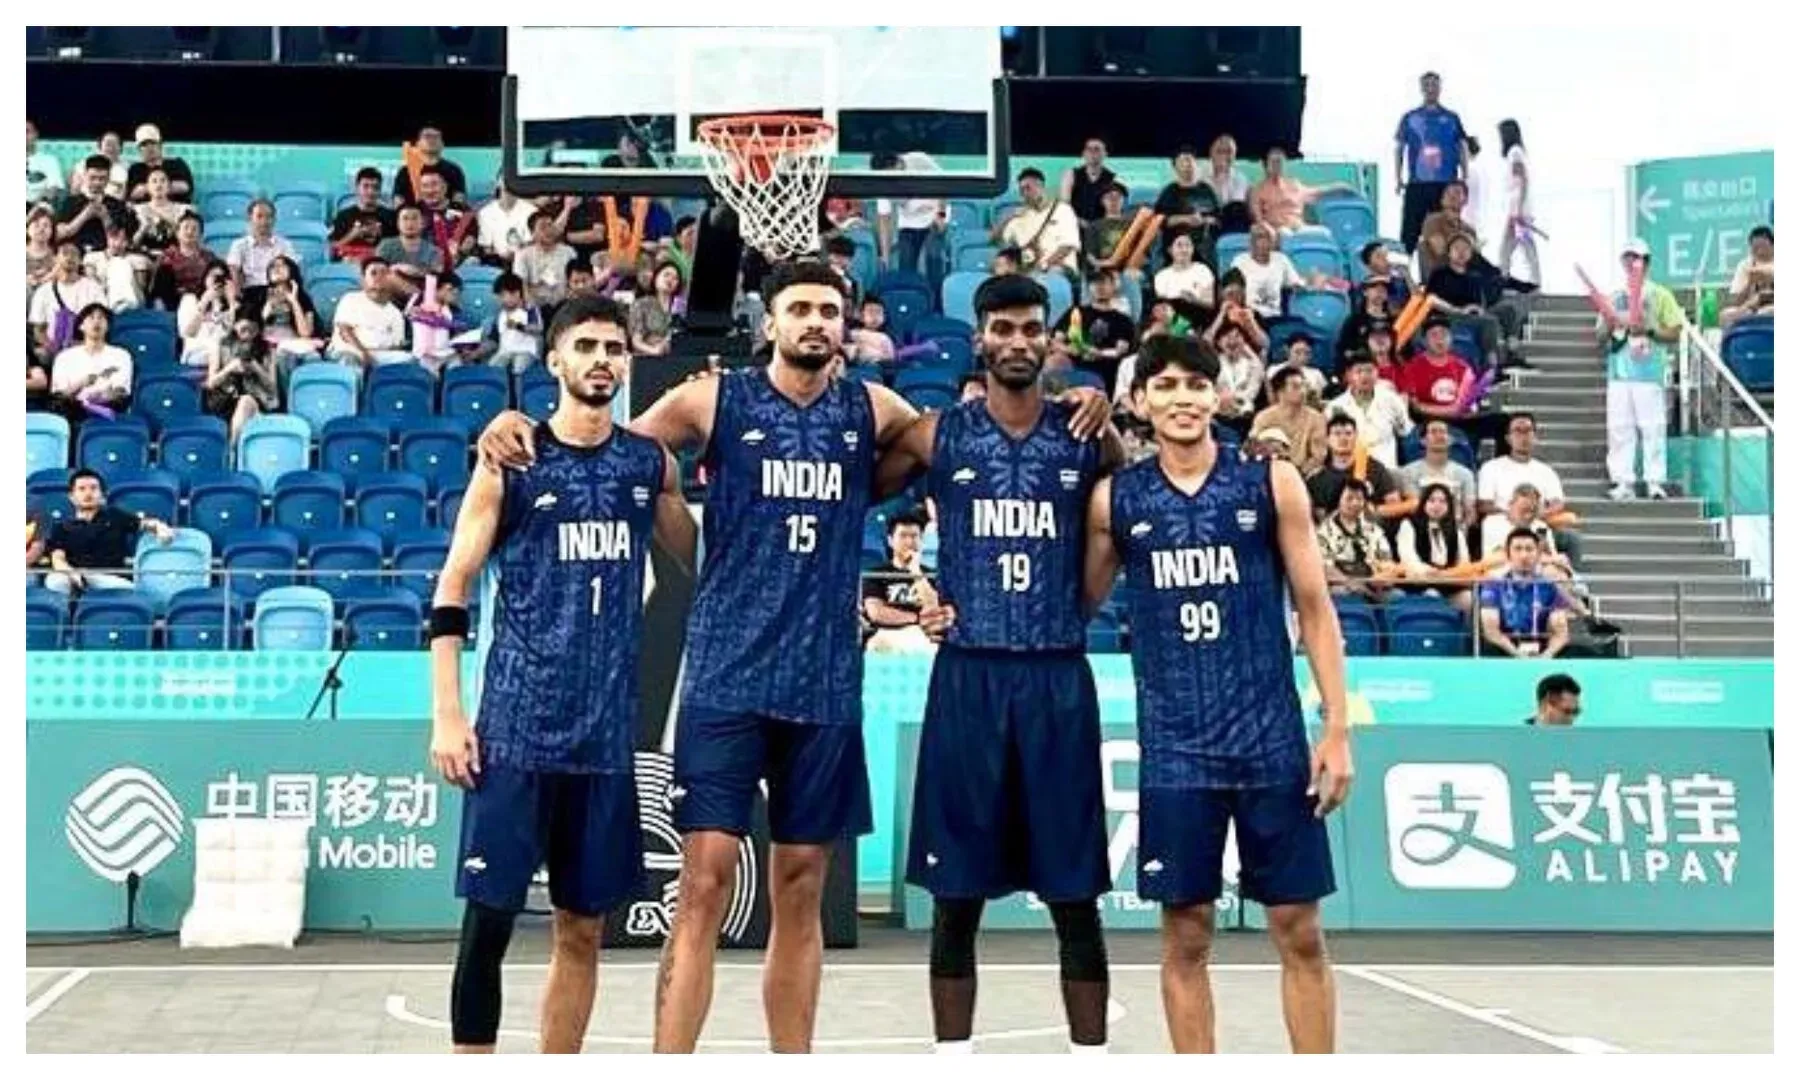 india 3 x 3 basketball medal in asian games